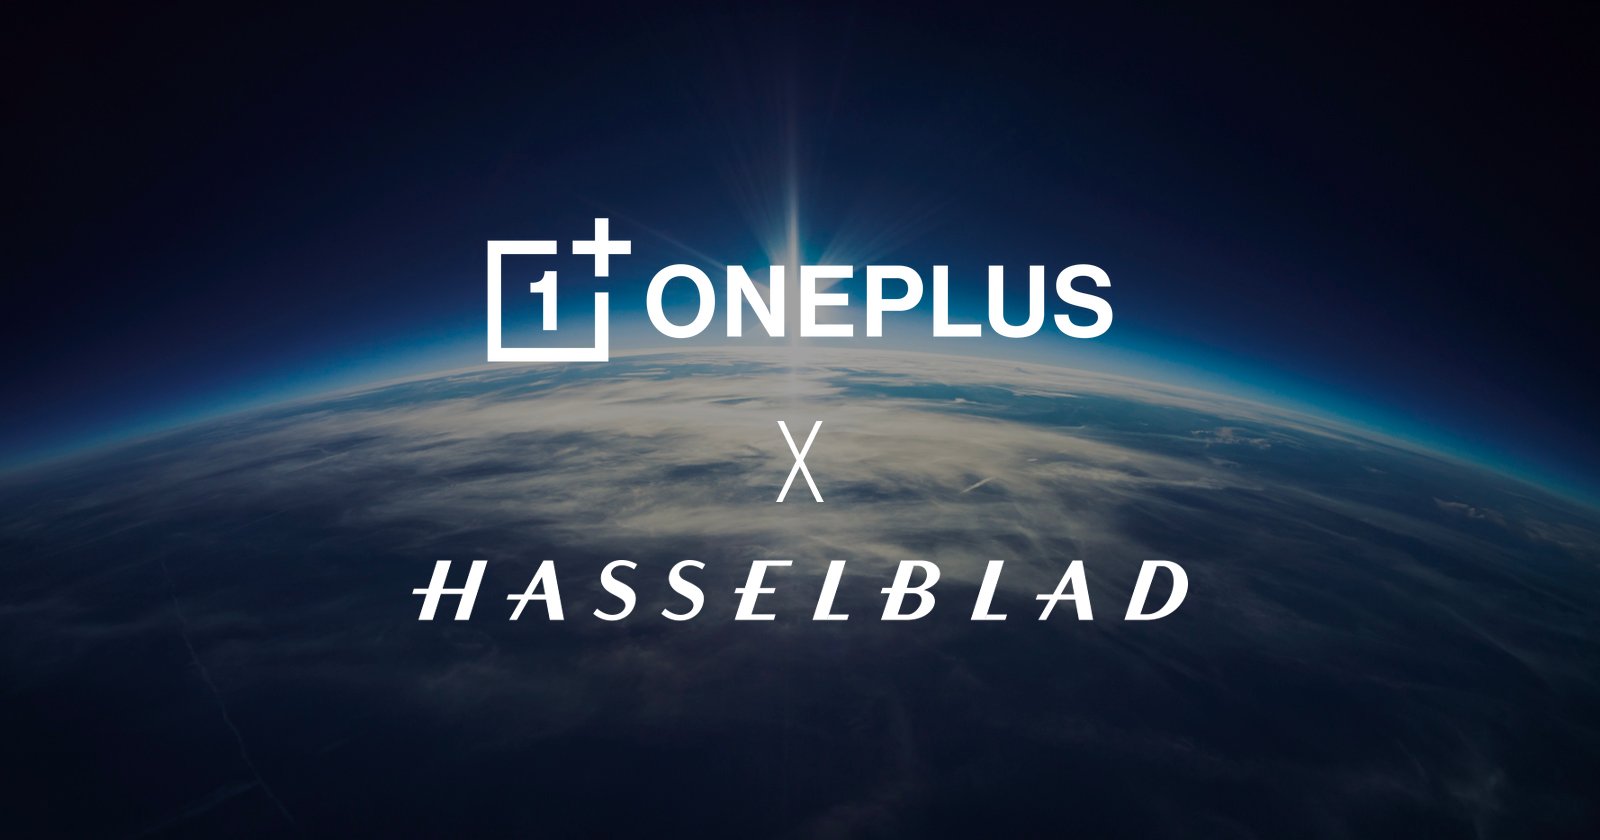 OnePlus and Hasselblad team up to co-develop smartphone cameras